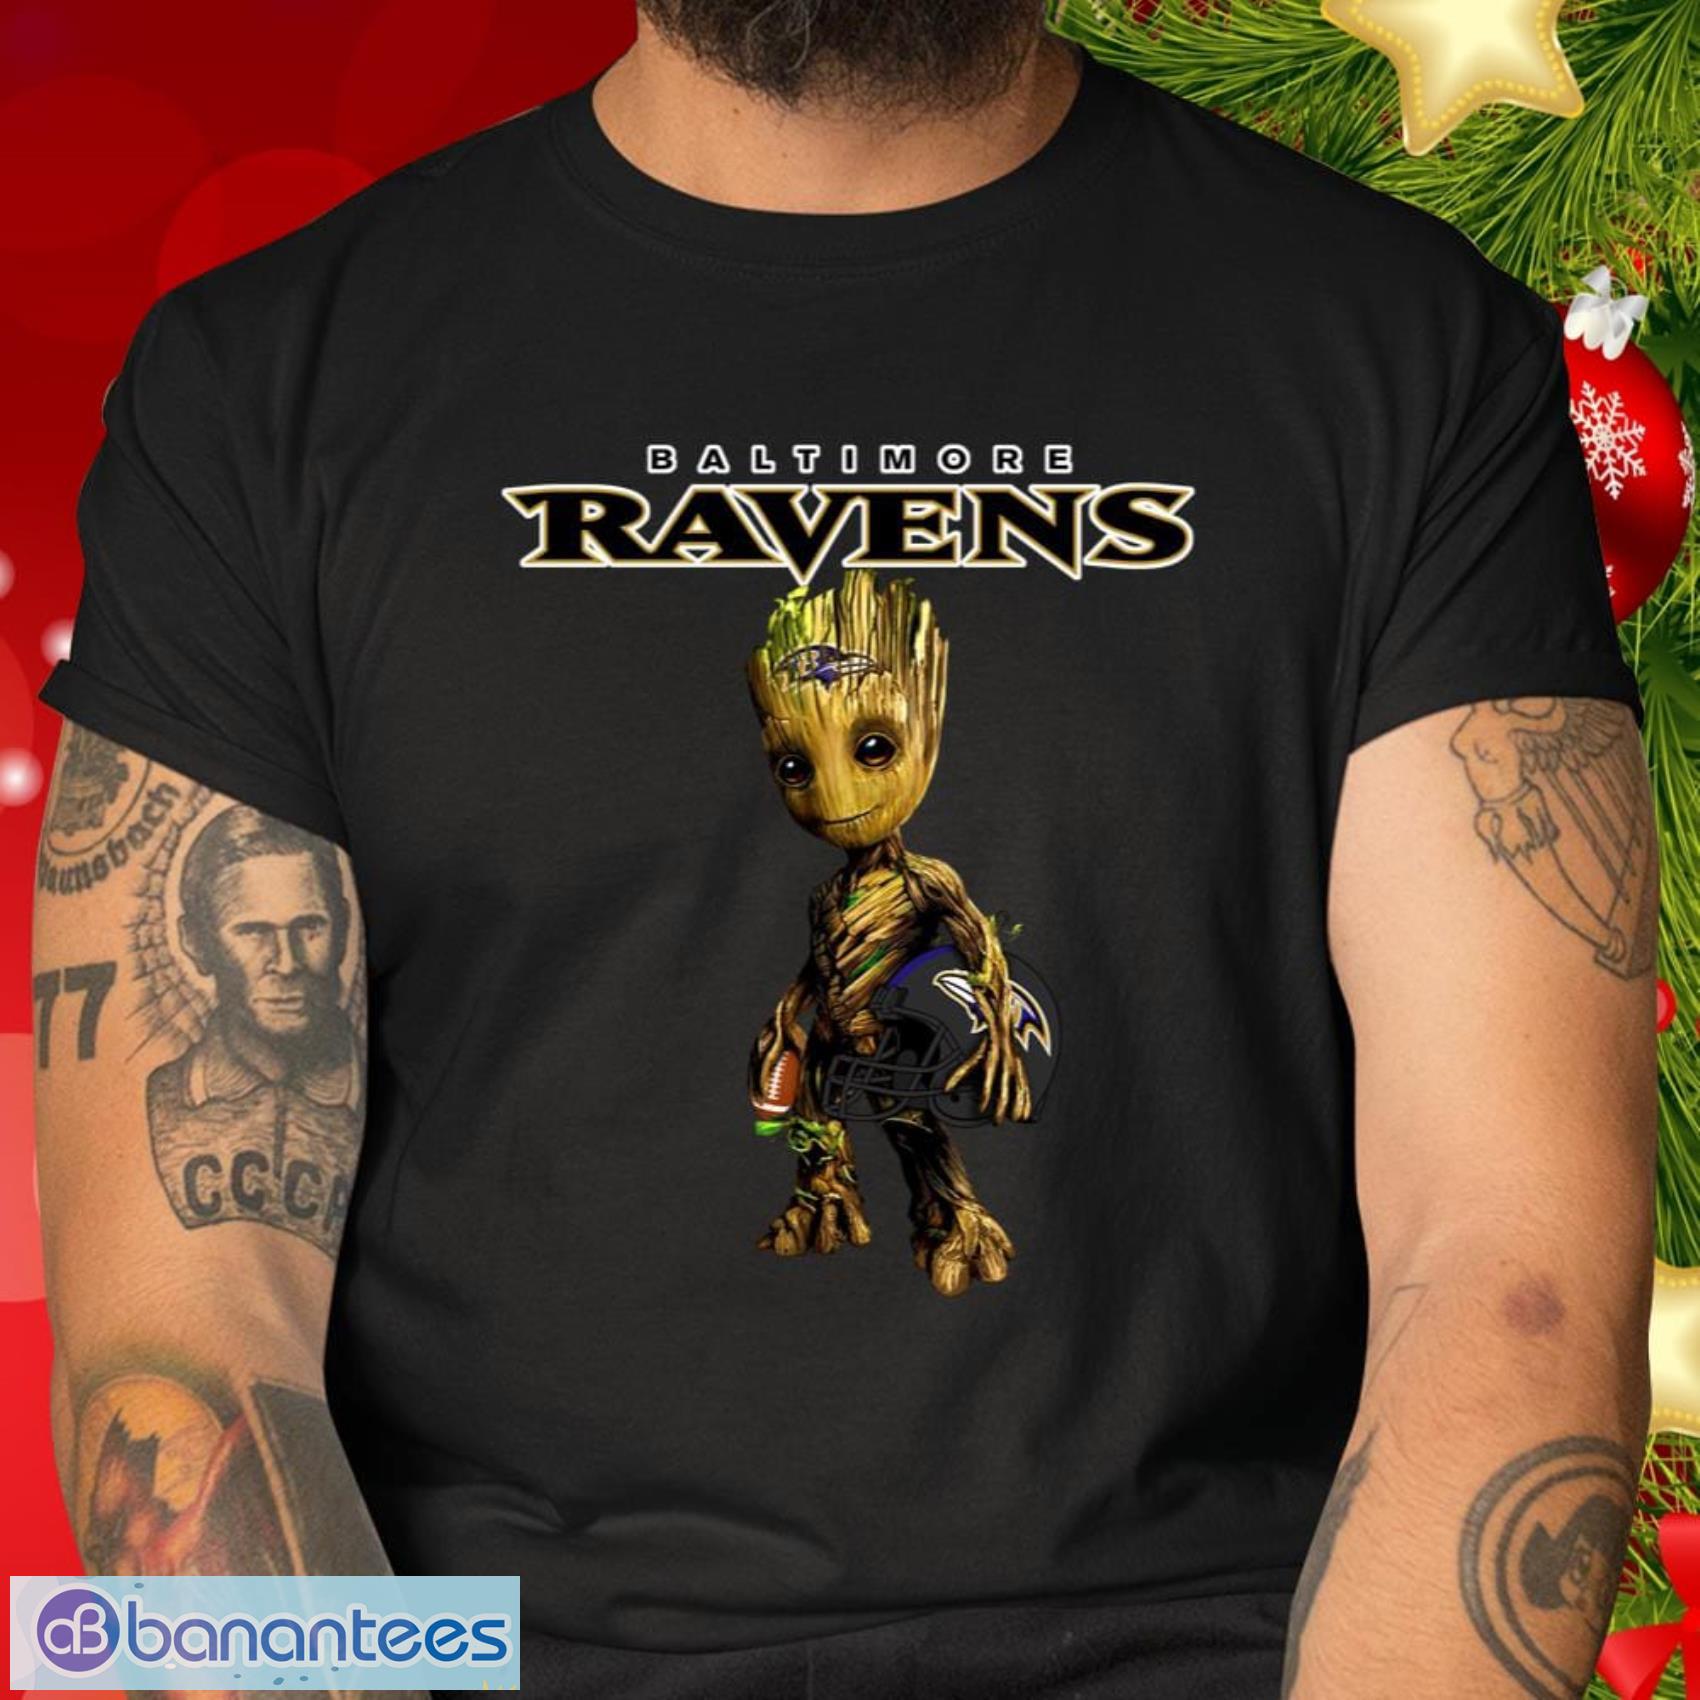 Baltimore Ravens NFL Football Gift Fr Fans Groot Marvel Guardians Of The Galaxy T Shirt - Baltimore Ravens NFL Football Groot Marvel Guardians Of The Galaxy T Shirt_2